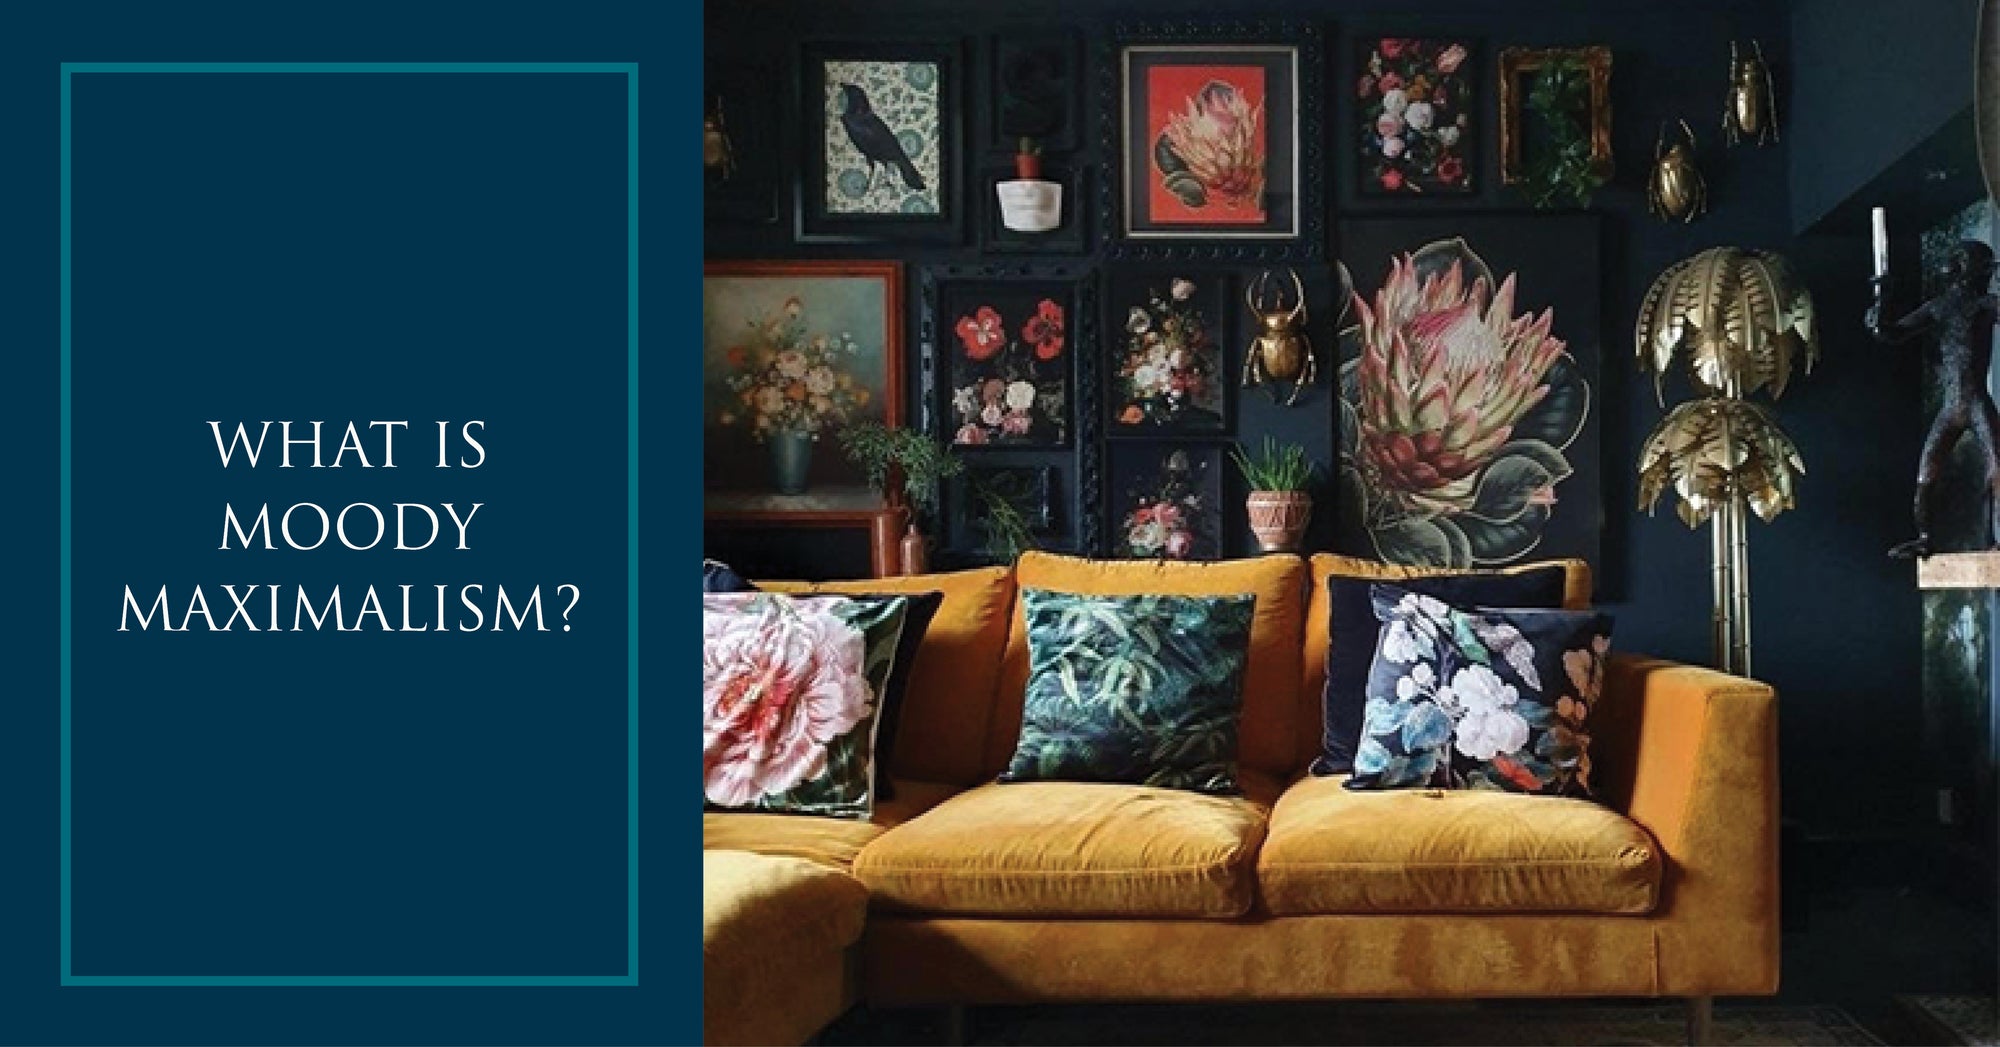 What is Moody Maximalism?